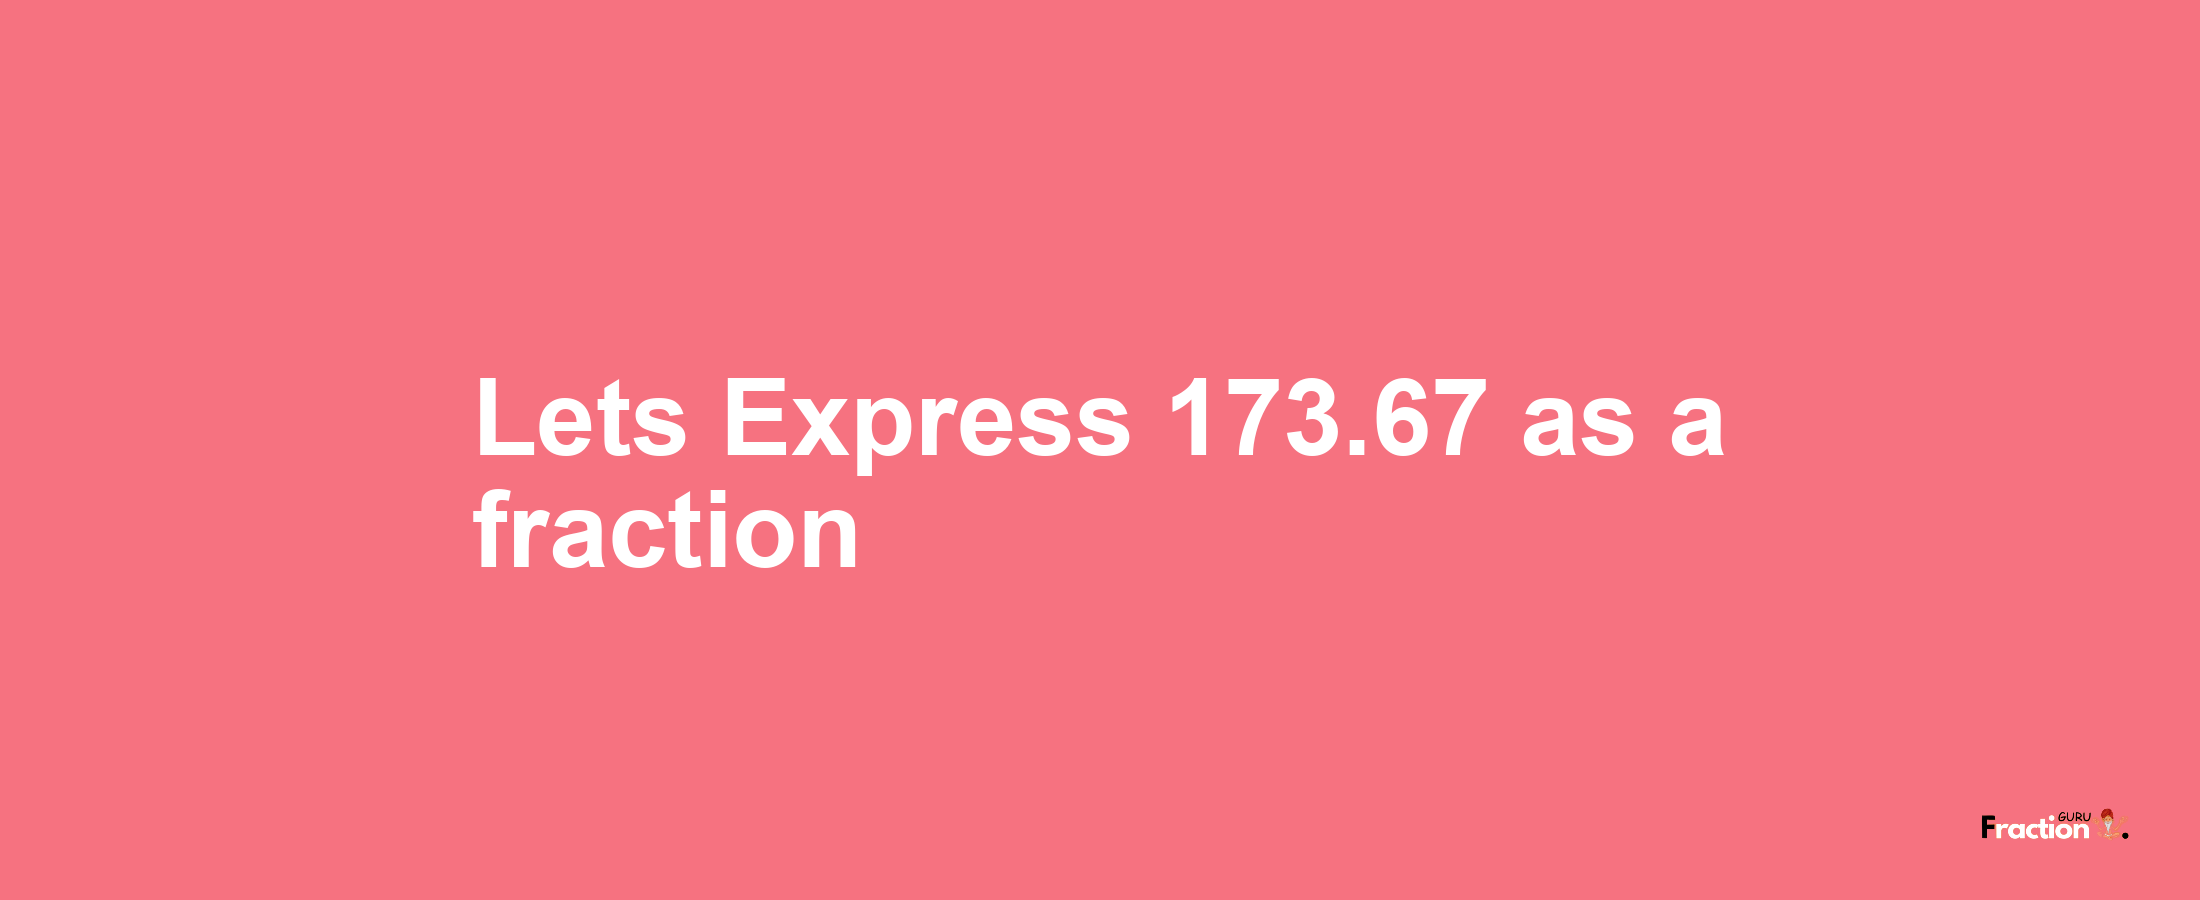 Lets Express 173.67 as afraction